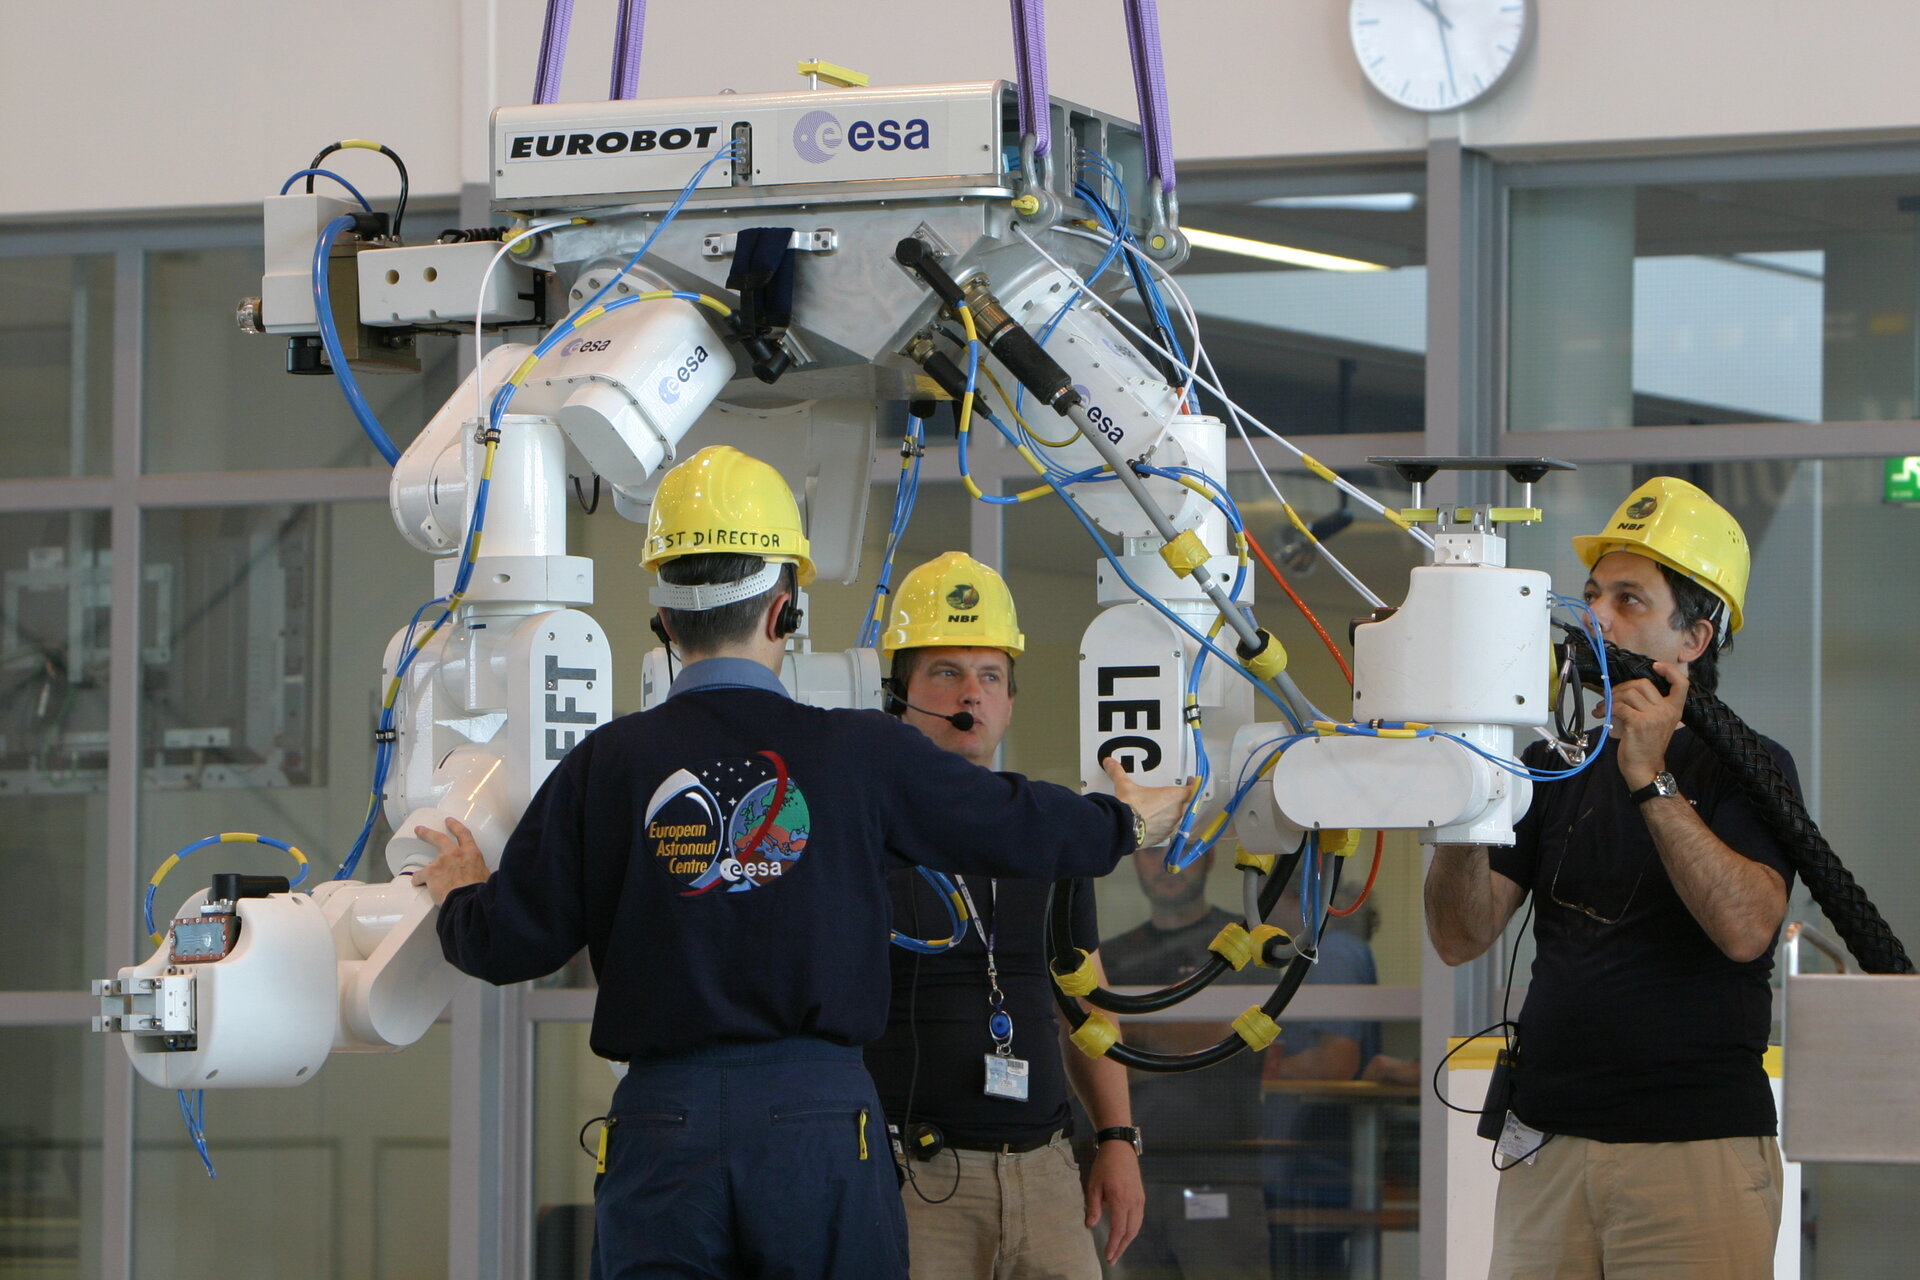 Preparing the Eurobot WET Model ahead of trials in the Neutral Buoyancy Facility at EAC